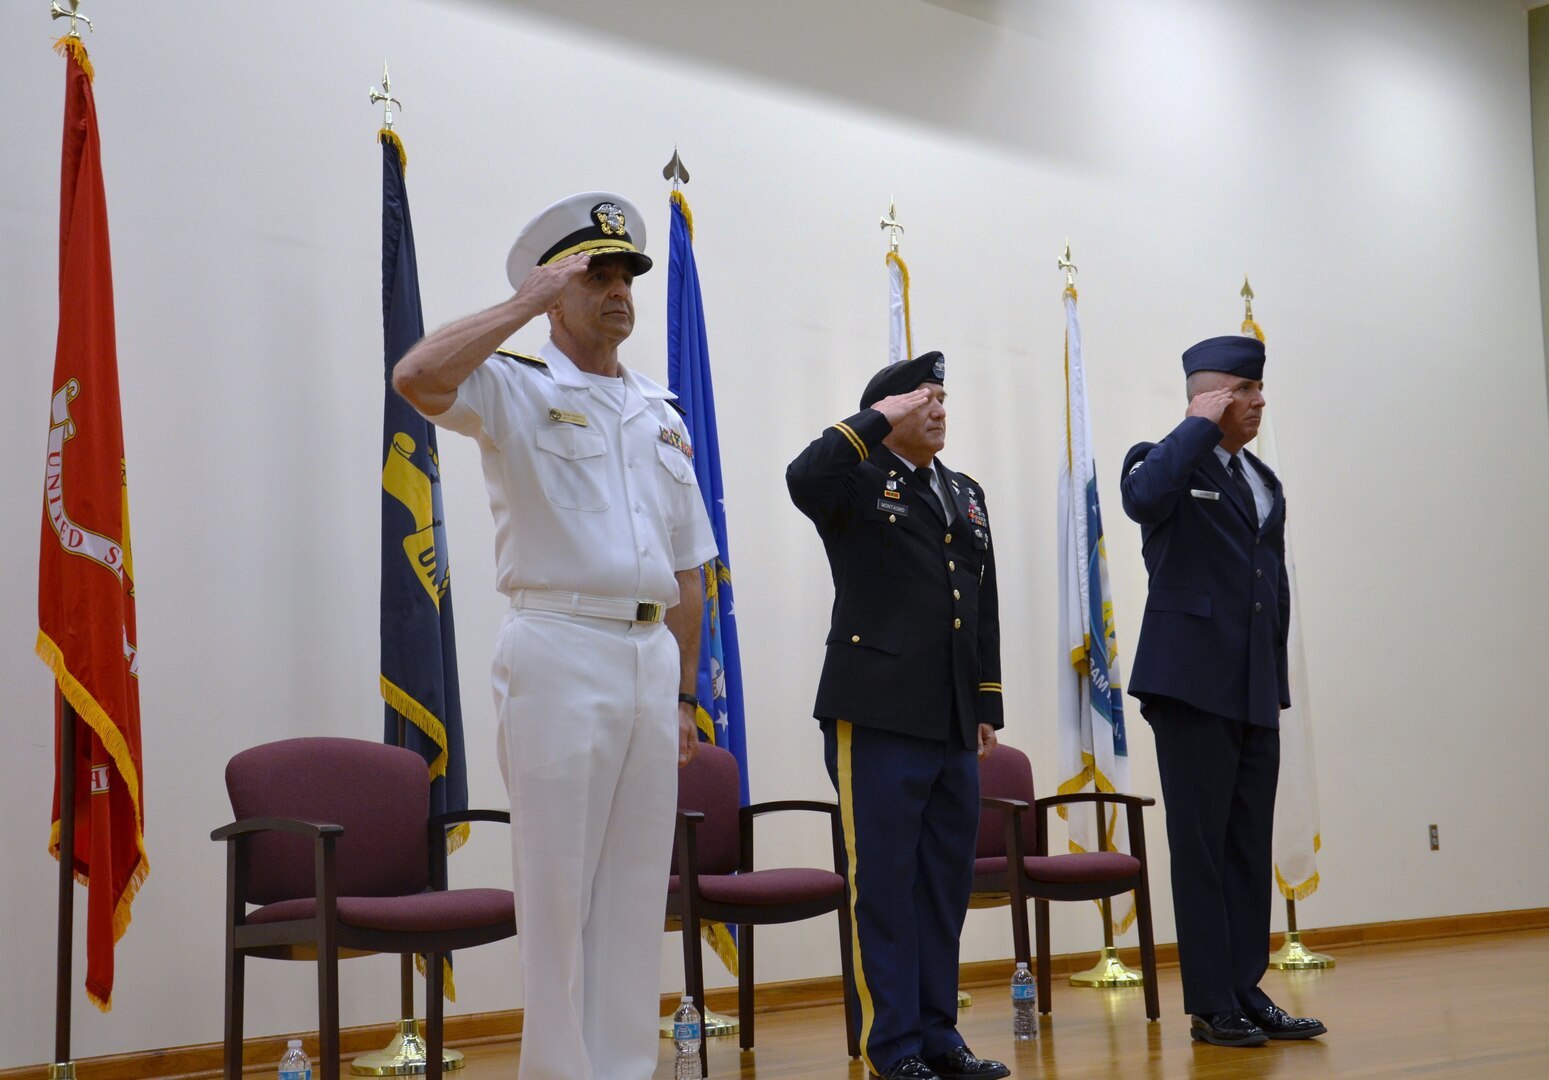 Navy Rear Adm. William M. Roberts (far left) became the second commandant of the Medical Education & Training Campus (METC) during an Assumption of Commandant ceremony September 7.  (Also pictured: Army Col. Gino Montagno, METC deputy commandant (center), and  Air Force Chief Master Sgt. Joel Berry, METC command chief (right). METC trains the world's finest medics, corpsmen, and
techs; supporting our nation's ability to engage globally. (Photo by Lisa Braun/released)
